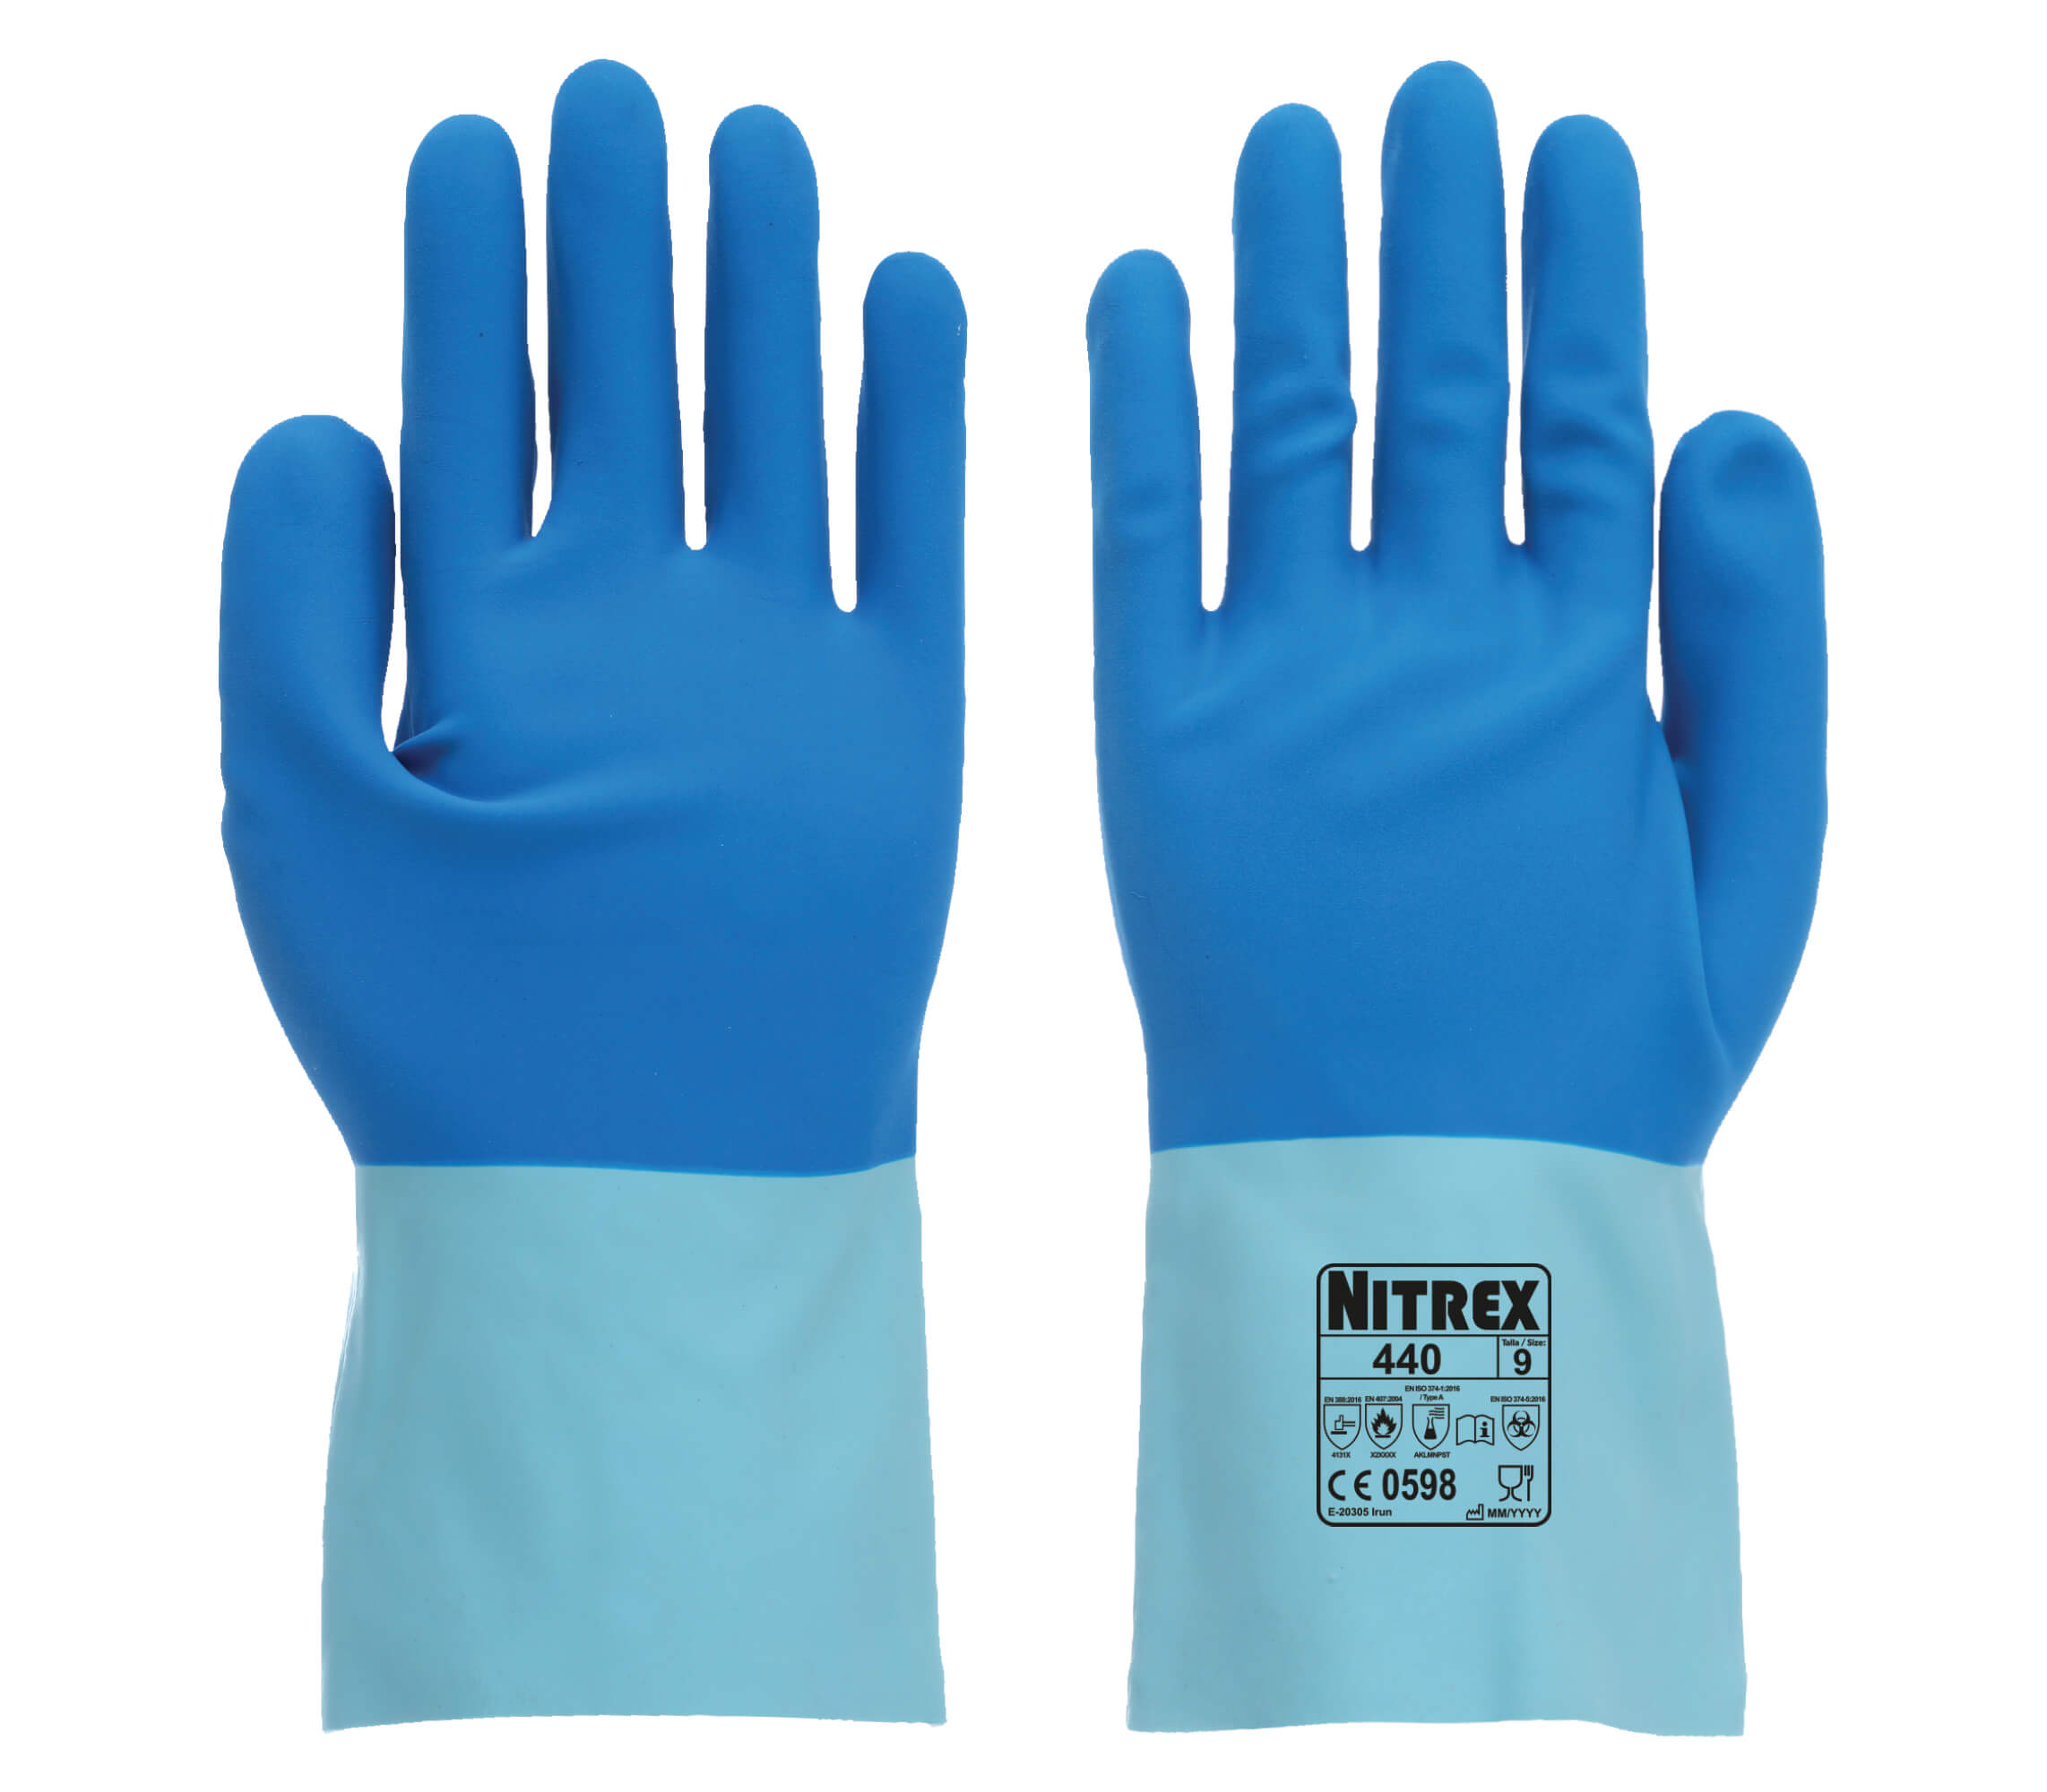 Nitrex 440 - Latex Heavy Duty Chemical Resistant Gloves - Heat Resistant up to 250 - Size 7/Small